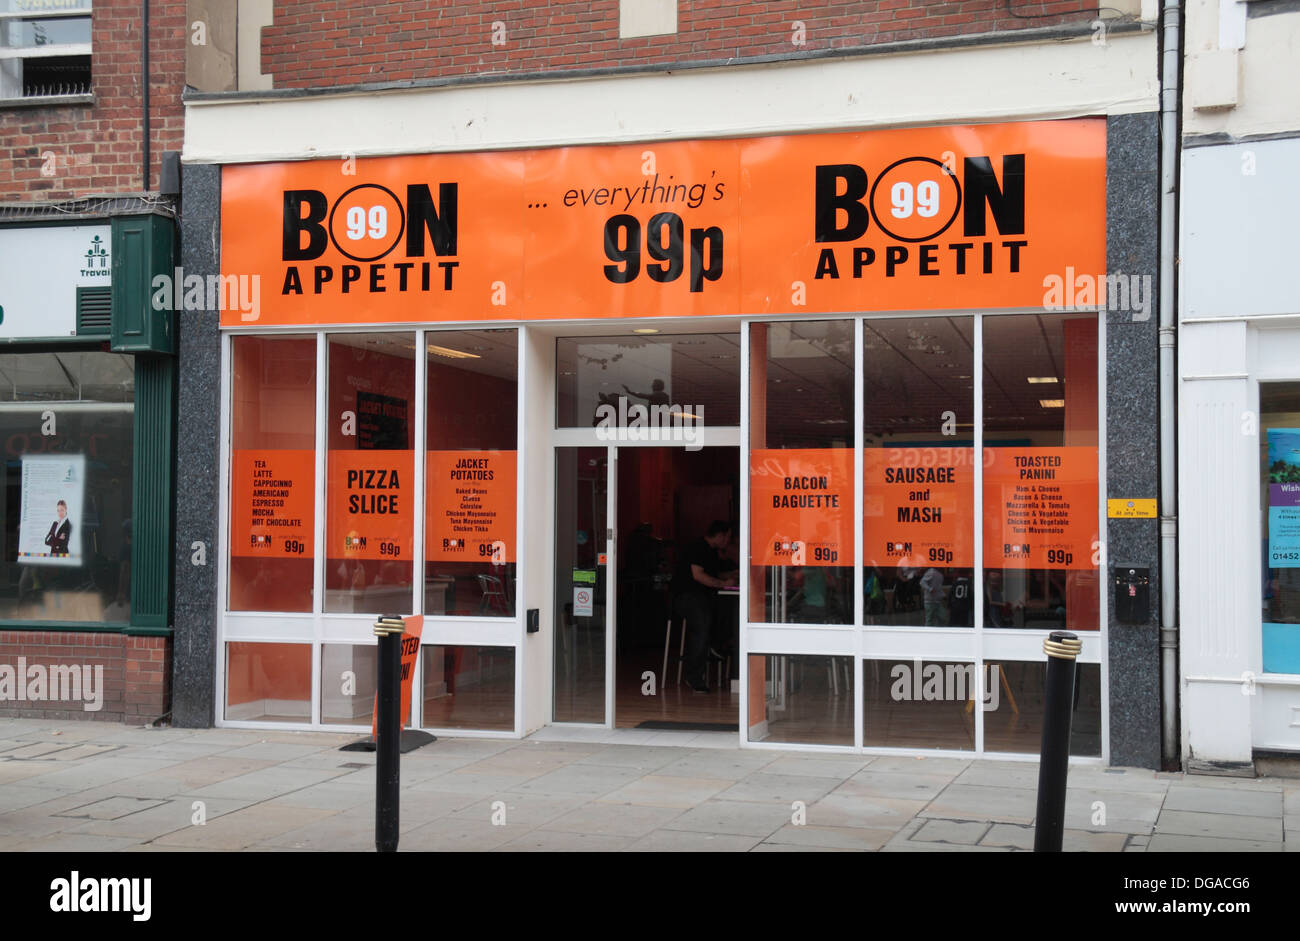 The 99p Bon Appetit cafe (where everything is 99 pence or £0.99) in Southgate Street, Gloucester, UK. Stock Photo